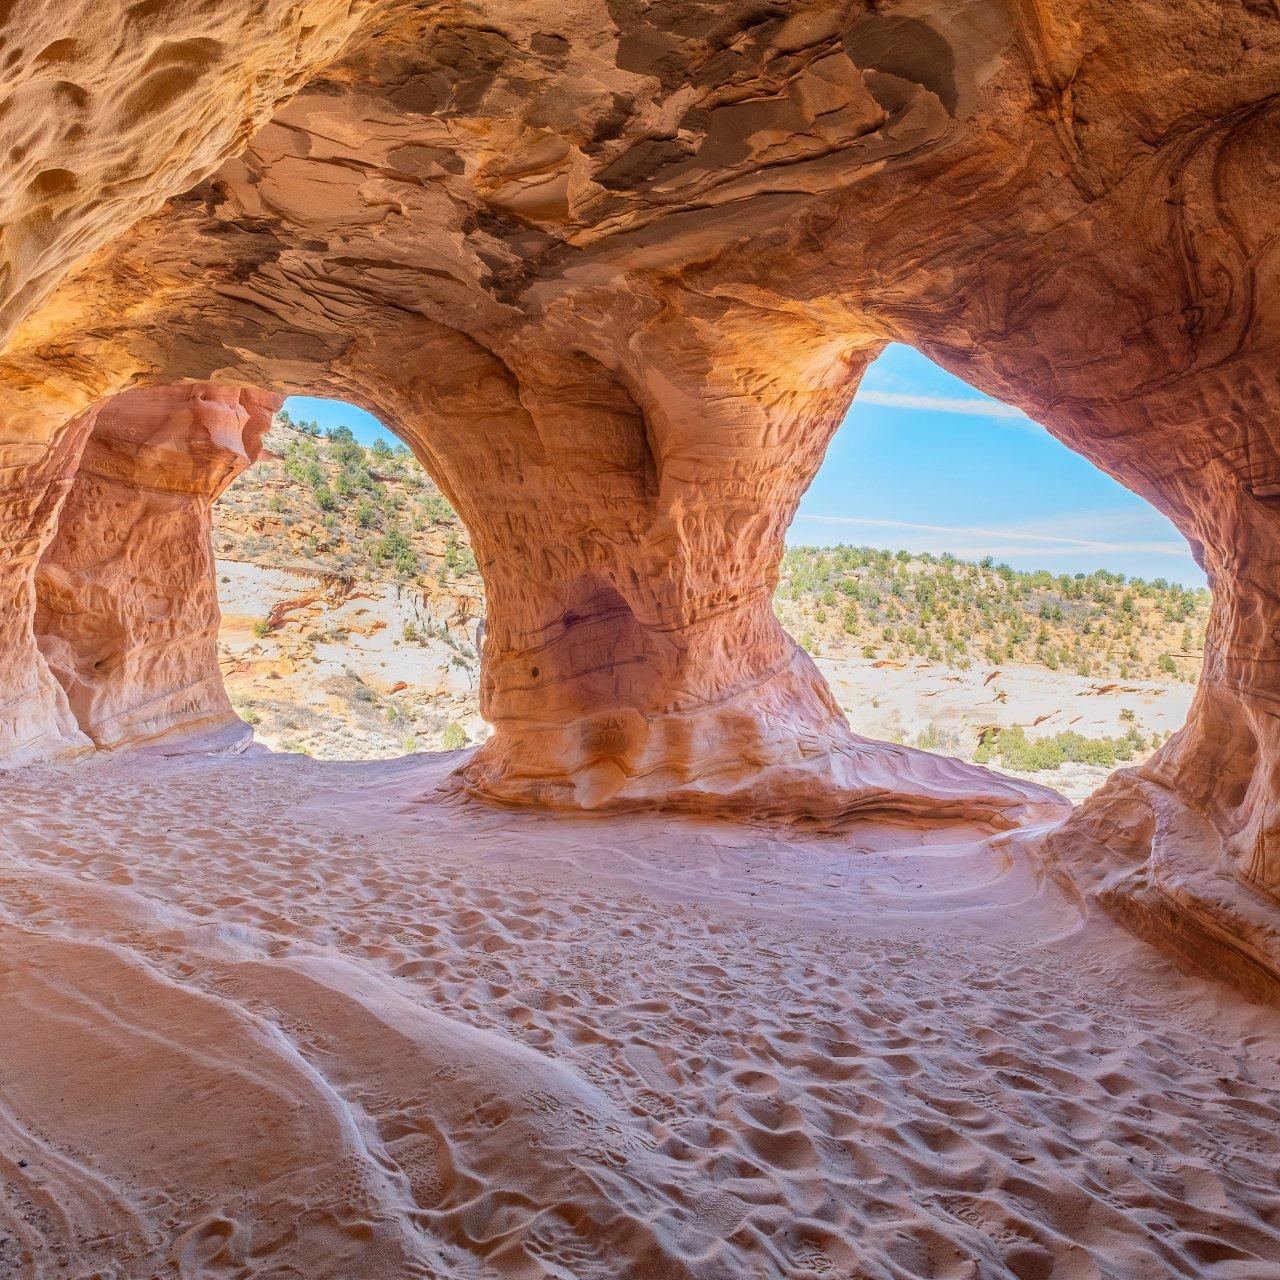 a cave in the desert with a view of the sky through a window .